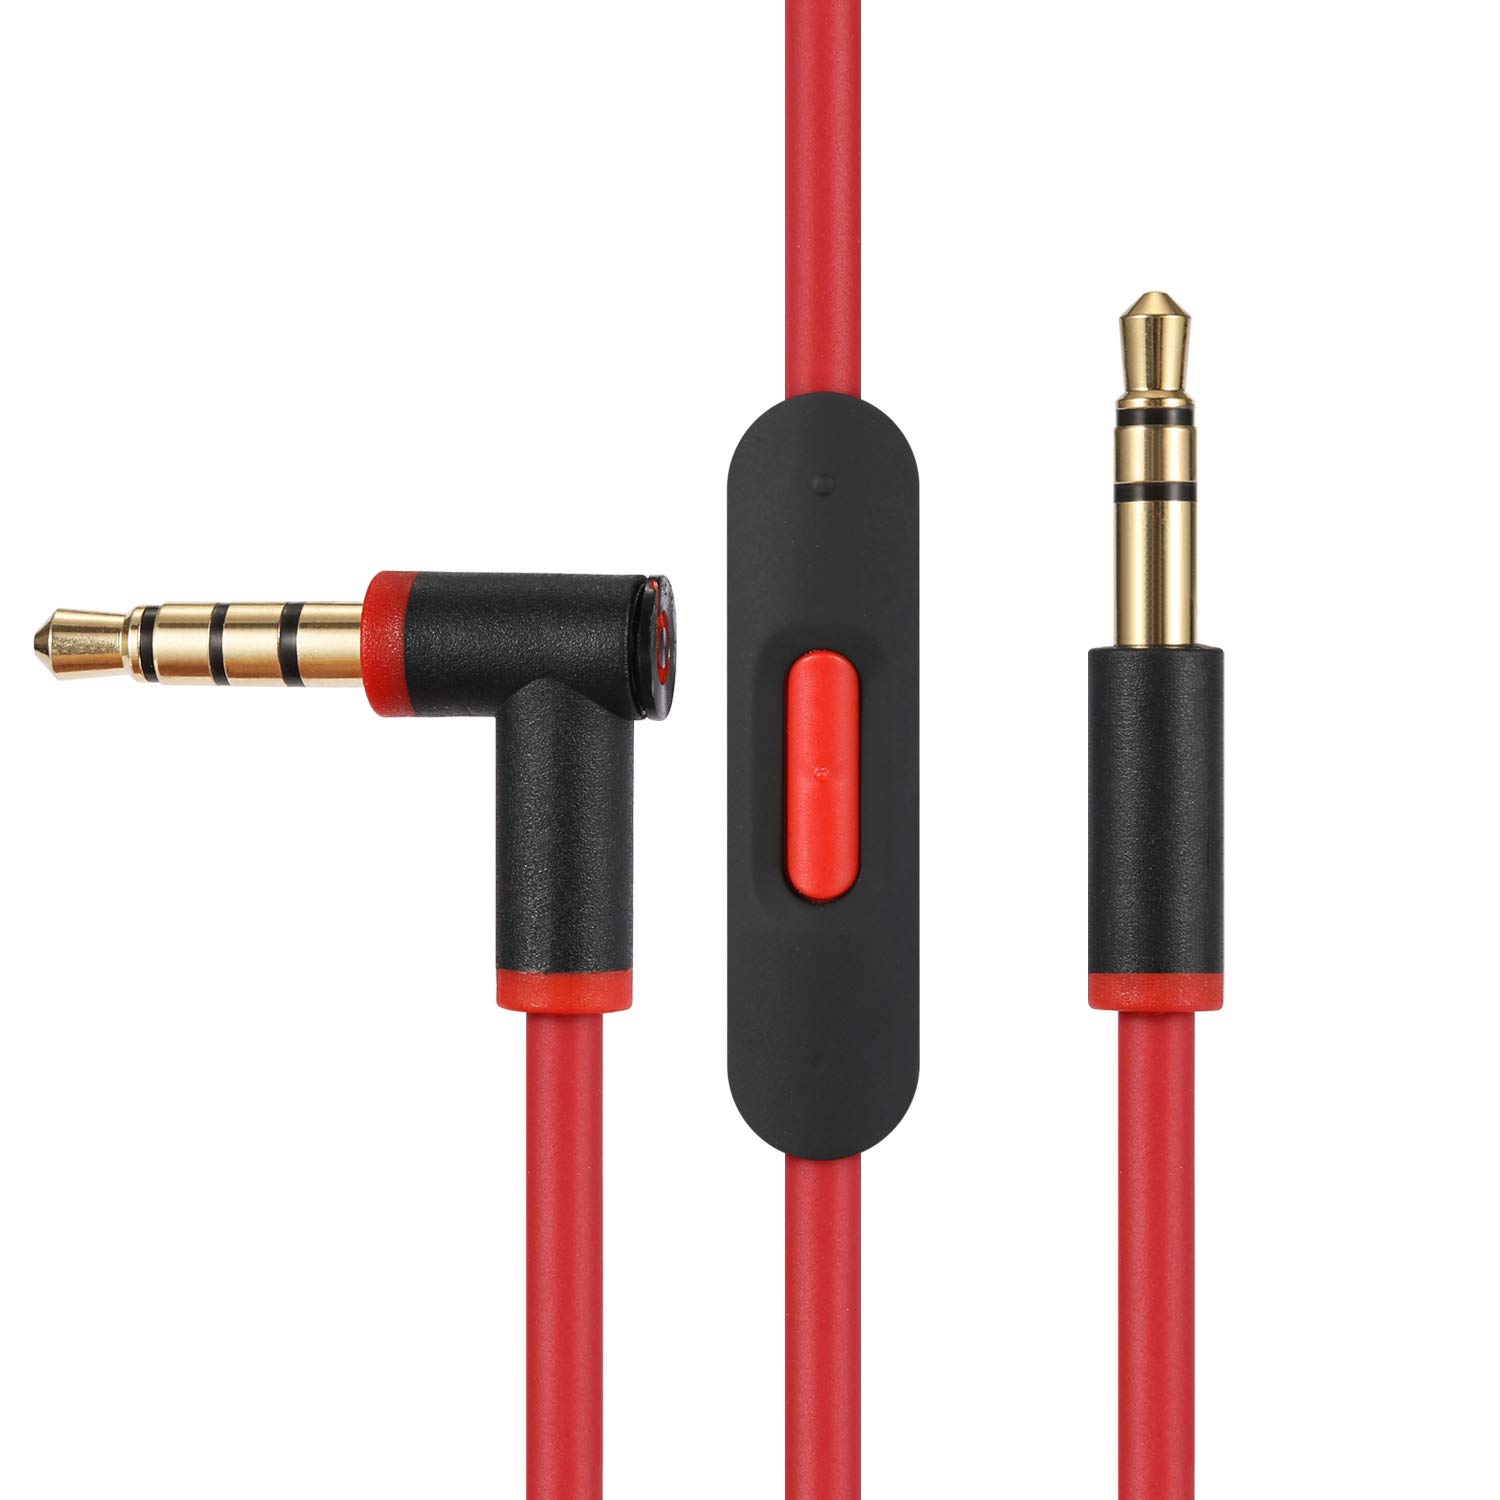 Dolaer Replacement Audio Cable Cord Wire,Compatible with Beats by Dr.Dre Headphones Studio/Solo/Pro/Detox/Wireless/Mixr/Executive/Pill with in-line Mic and Control- (Black Red)